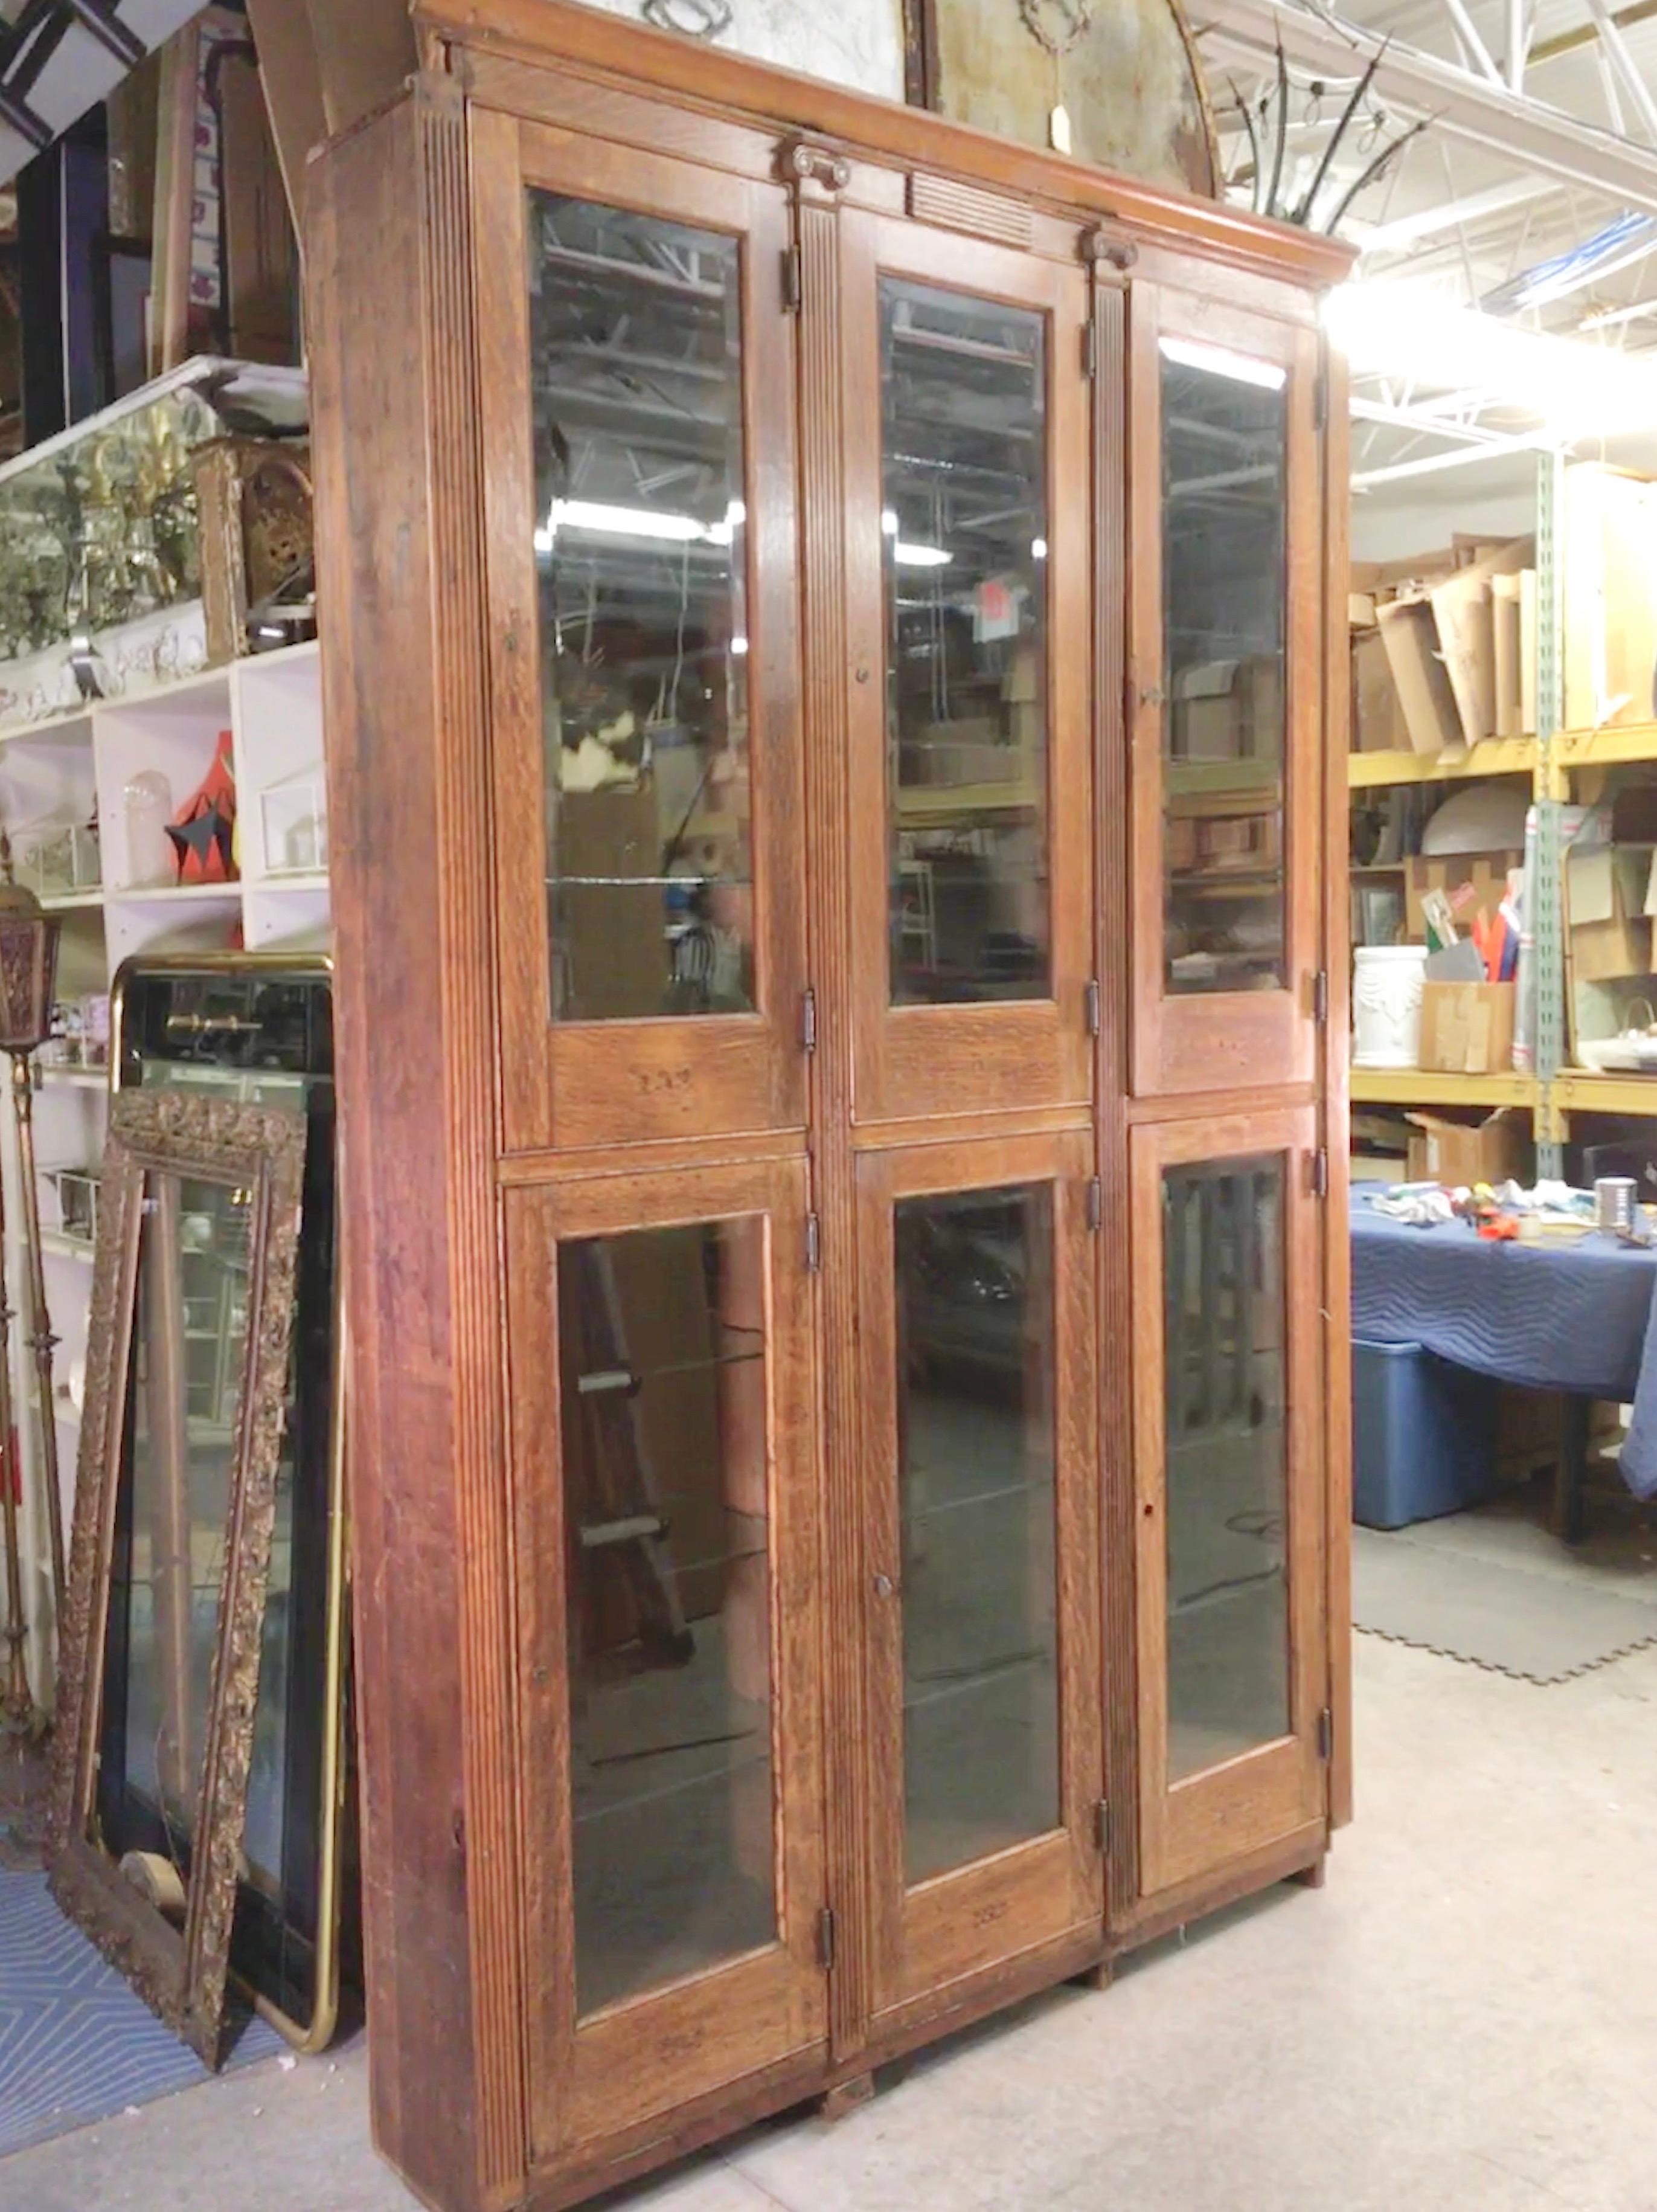 SATURDAY SALE 8 OCTOBER

This unit was salvaged from a men's fraternal organization building on the north shore of Boston (Masons, Odd Fellows, Elks,?) where it was a built-in architectural feature and may have been used as some sort of locker as